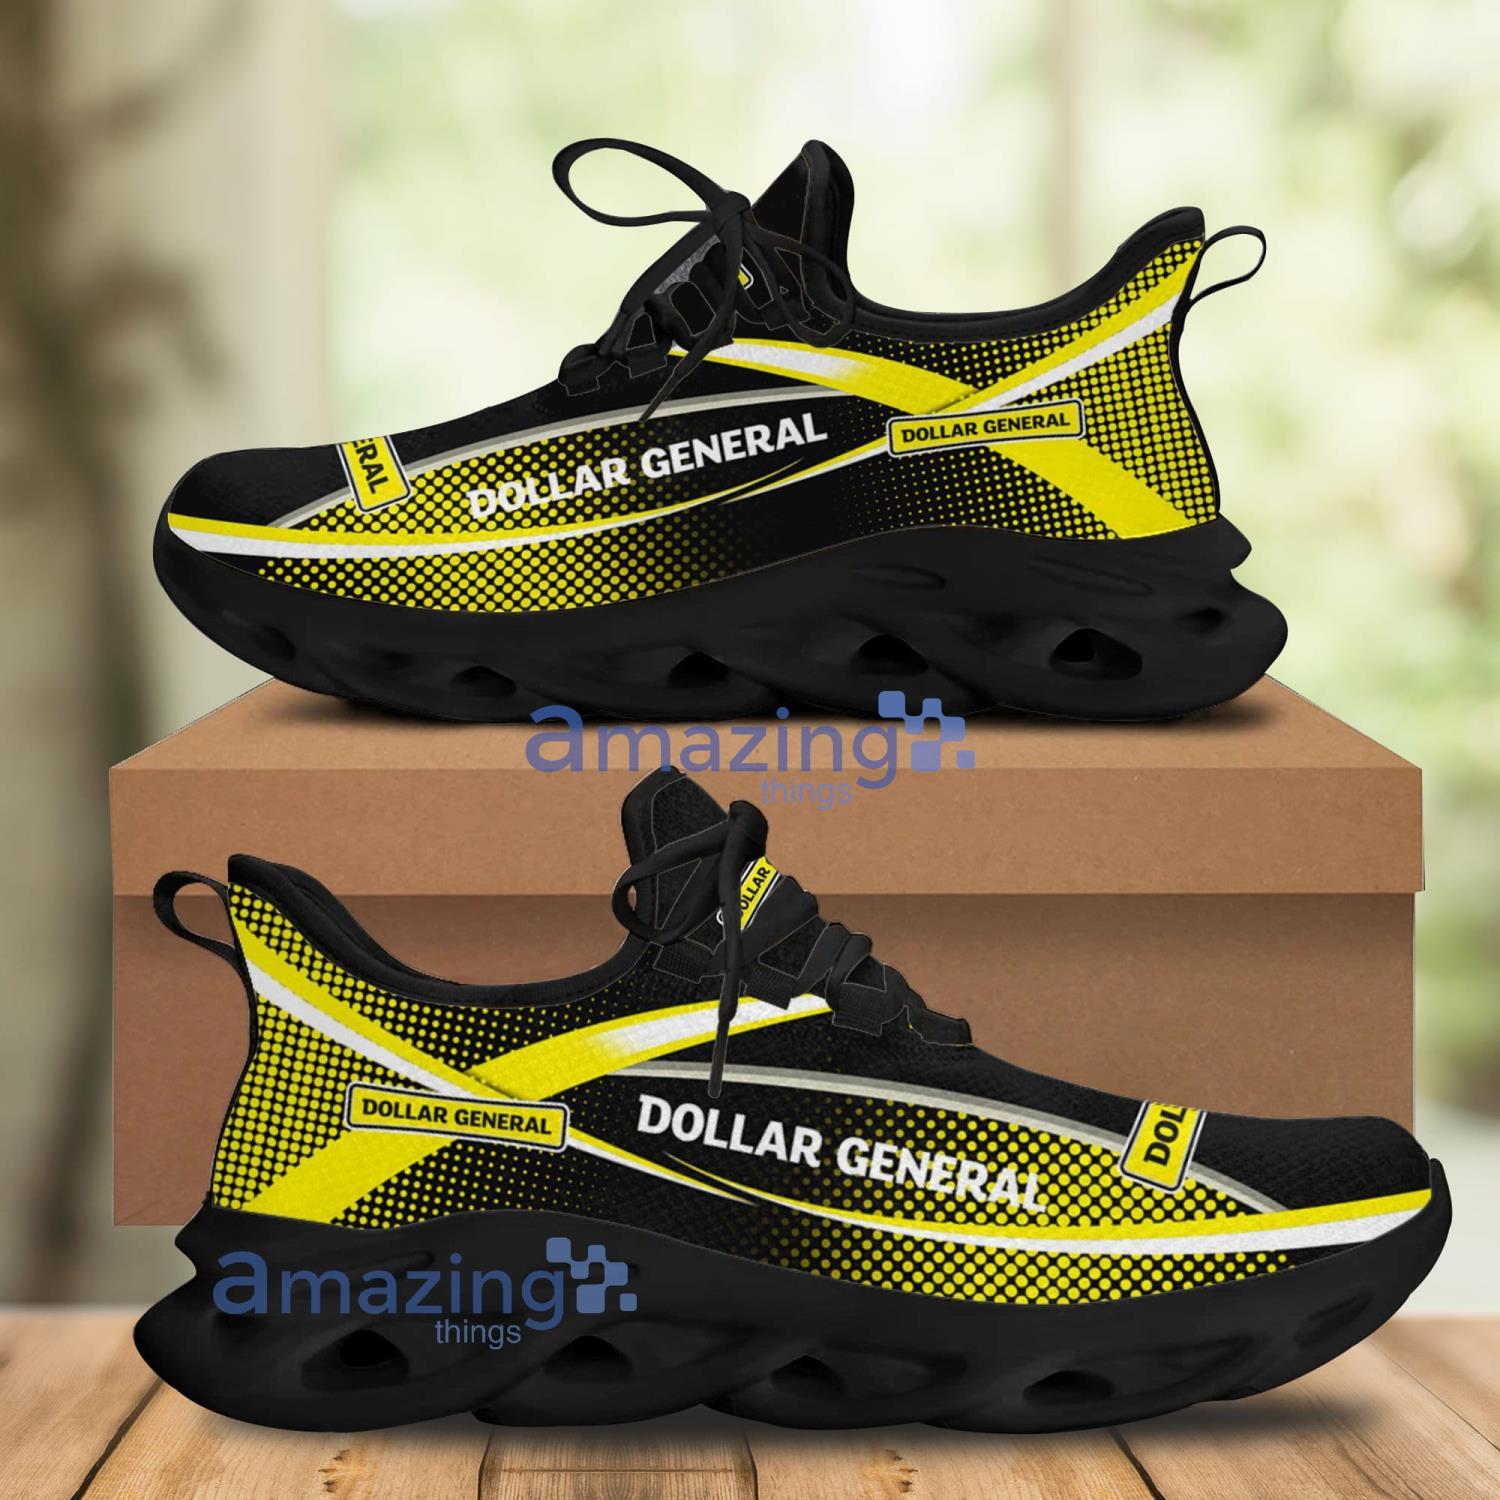 Dollar General Max Soul Shoes Running Sneakers